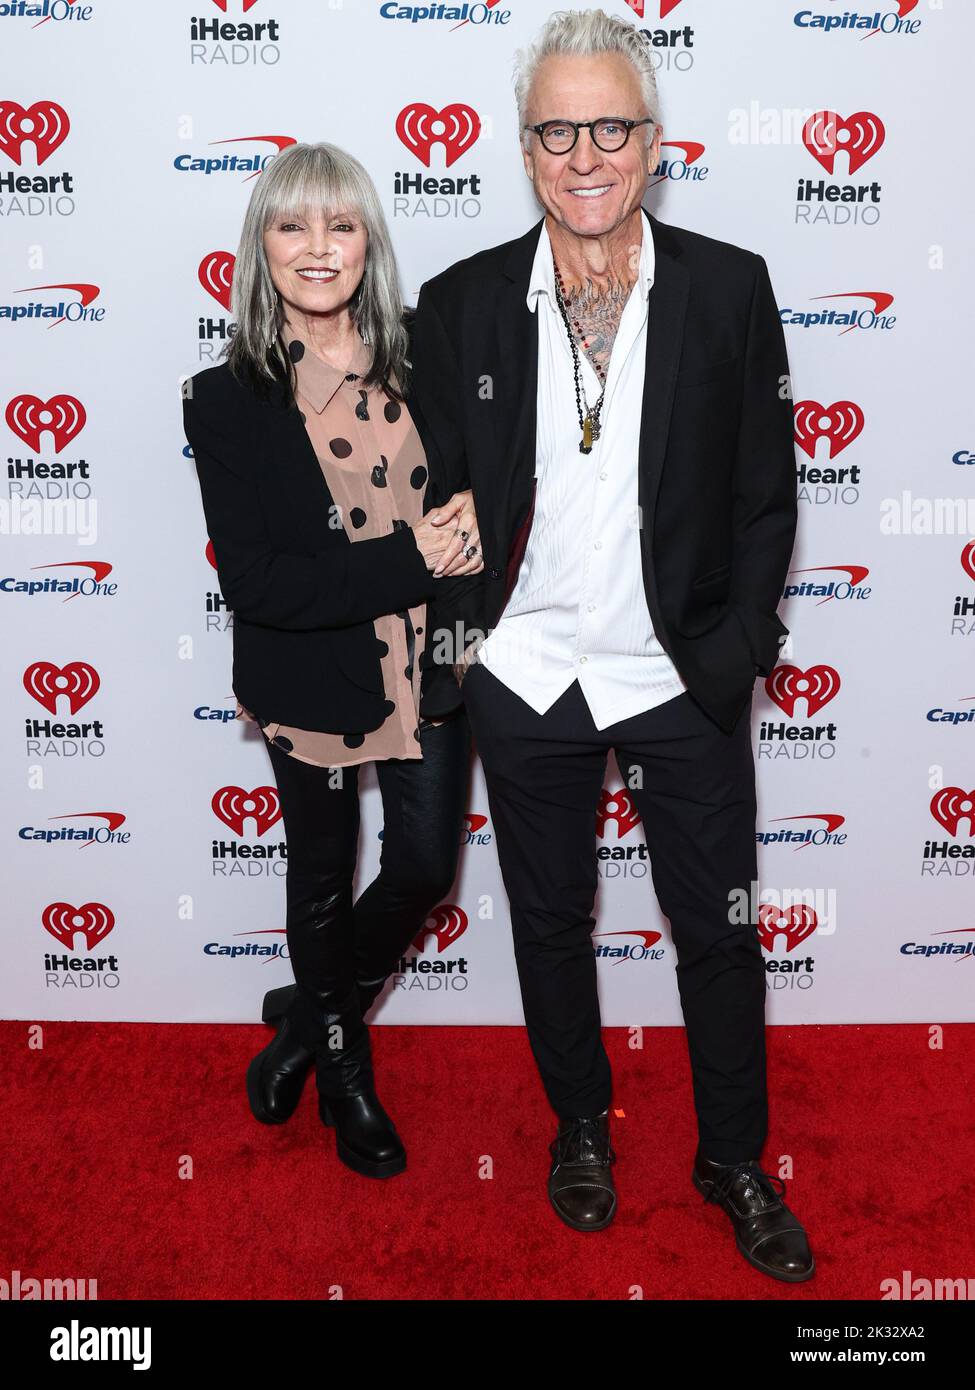 LAS VEGAS, NEVADA, USA - SEPTEMBER 23: Pat Benatar and Neil Giraldo pose in the press room at the 2022 iHeartRadio Music Festival - Night 1 held at the T-Mobile Arena on September 23, 2022 in Las Vegas, Nevada, United States. (Photo by Xavier Collin/Image Press Agency) Stock Photo